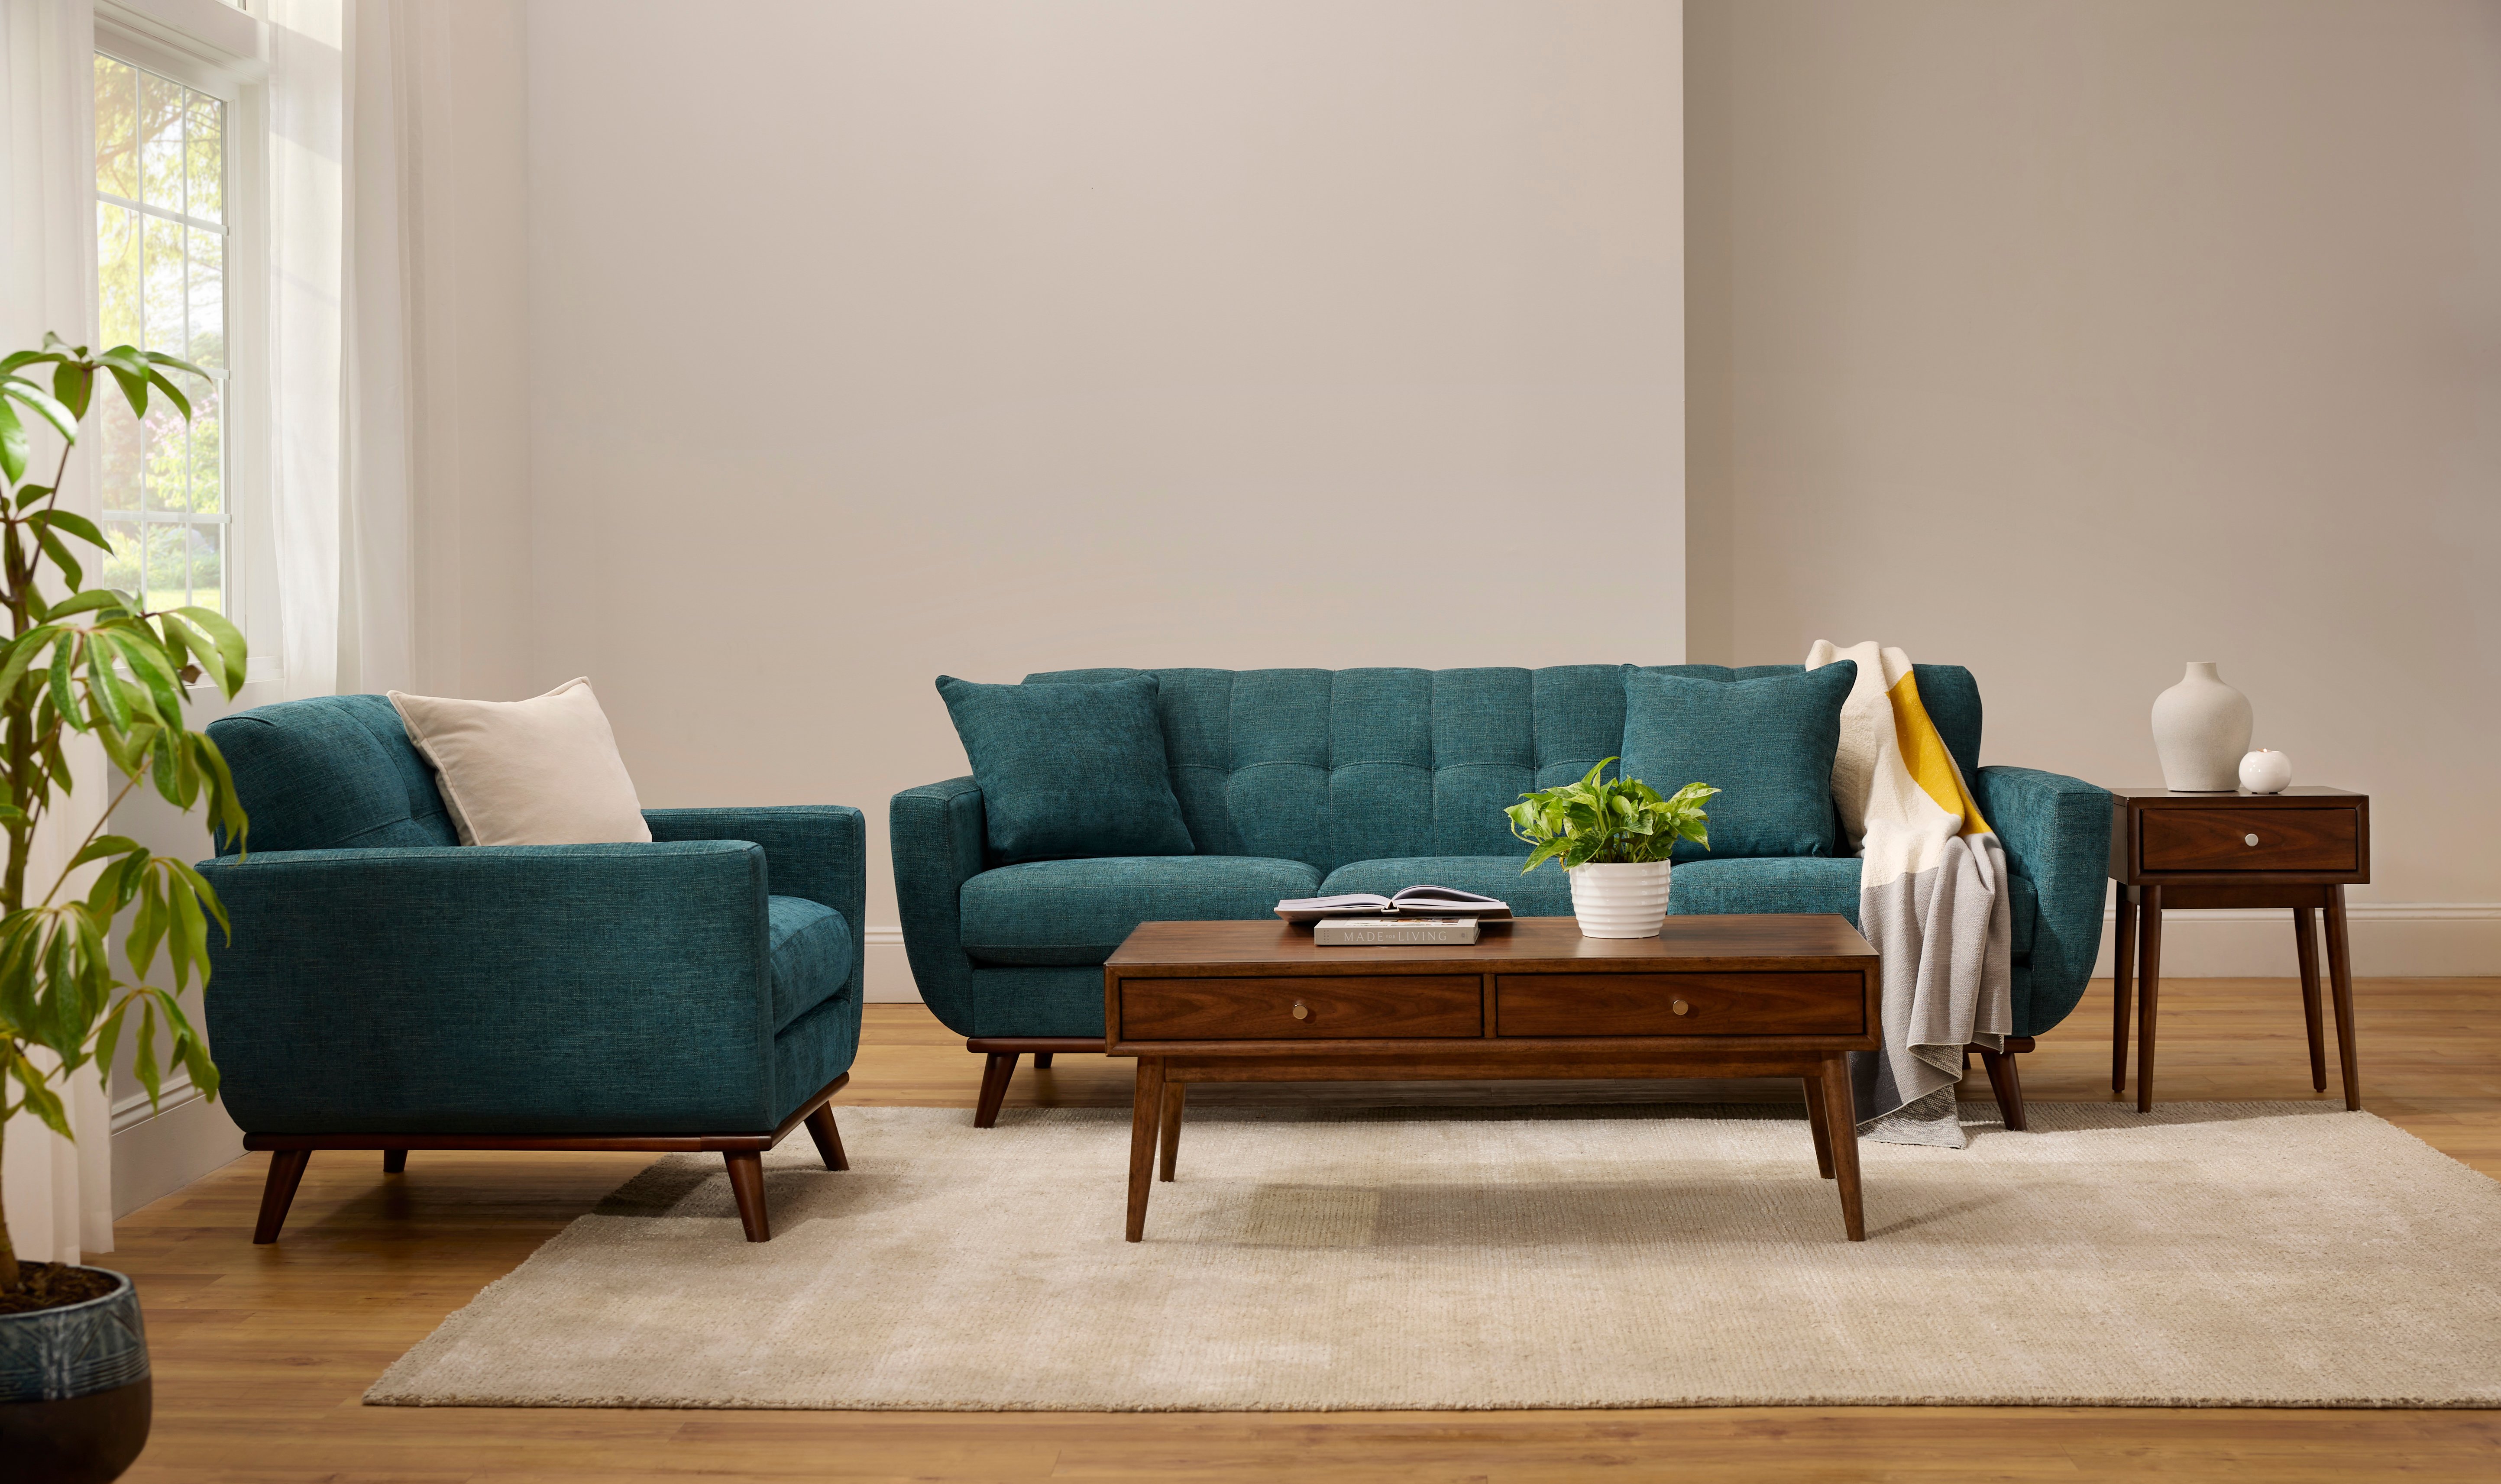 Coffee Table Size: How to Choose the Right Coffee Table Dimensions